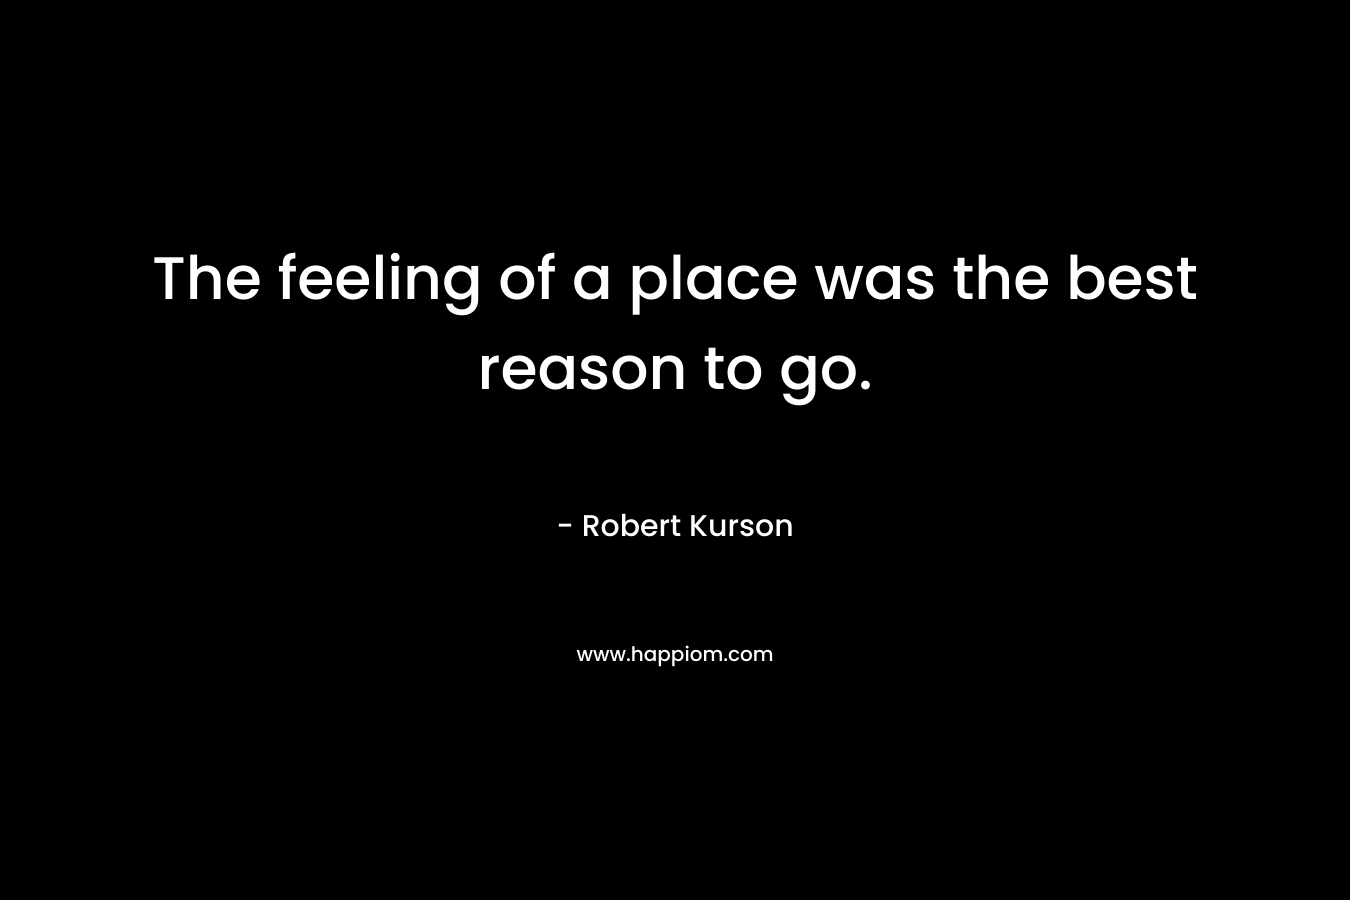 The feeling of a place was the best reason to go. – Robert Kurson